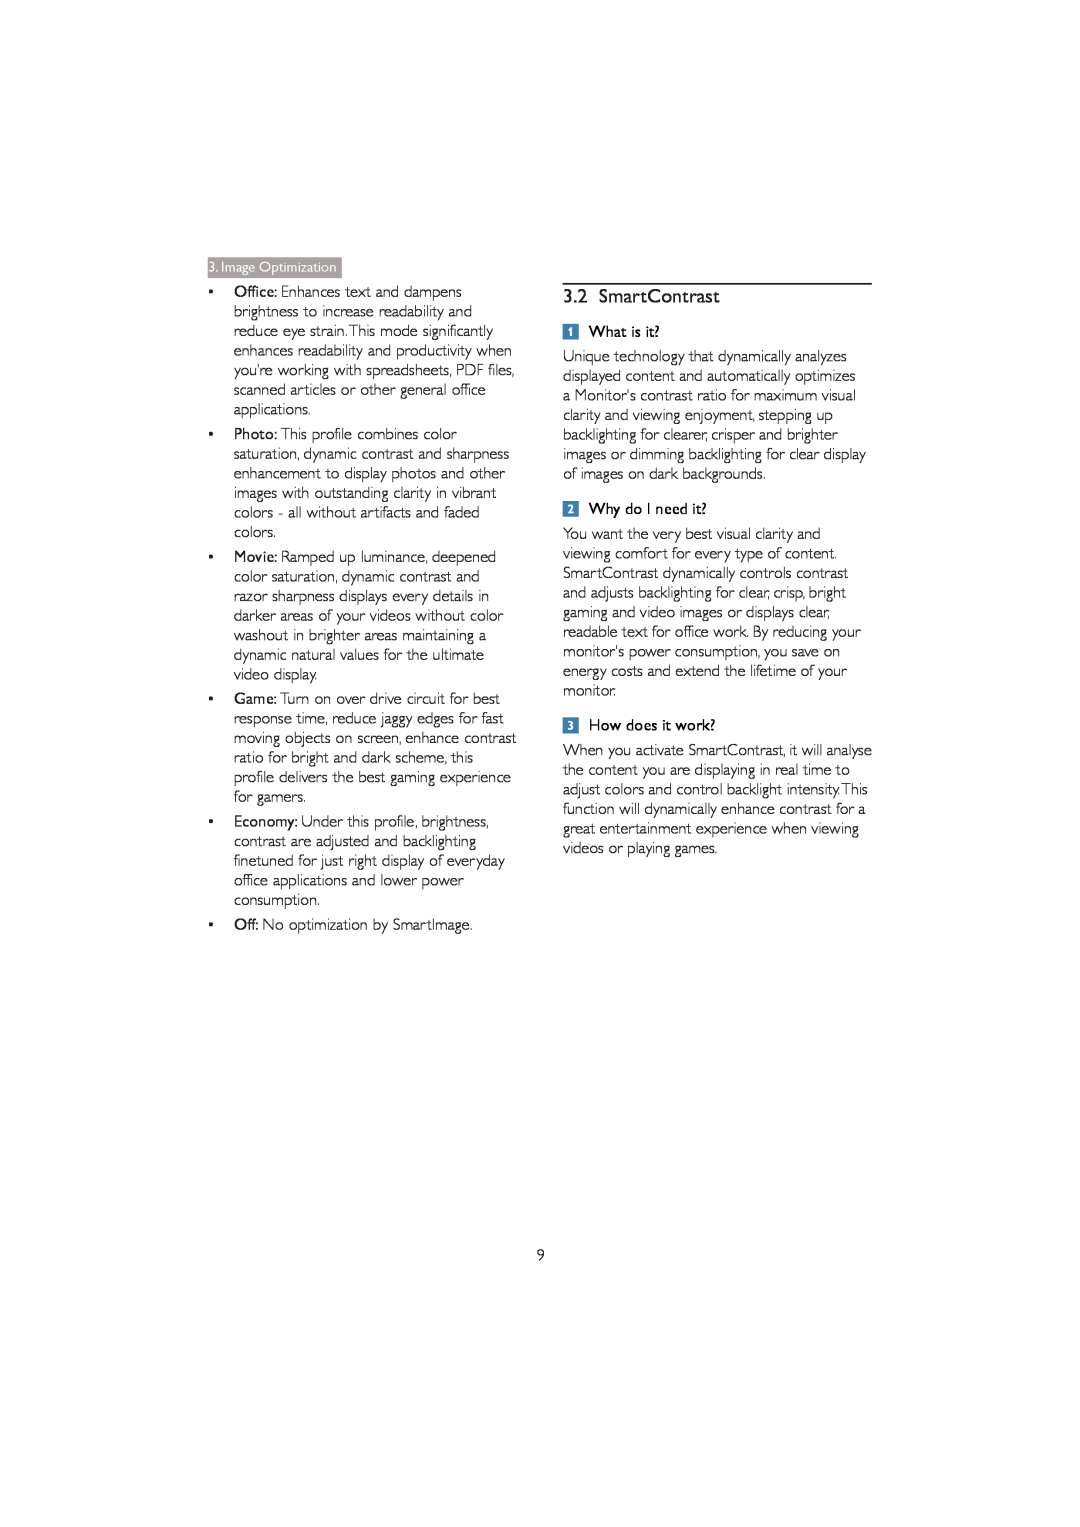 Philips 273P3Q user manual SmartContrast, What is it?, Why do I need it?, How does it work?, Image Optimization 